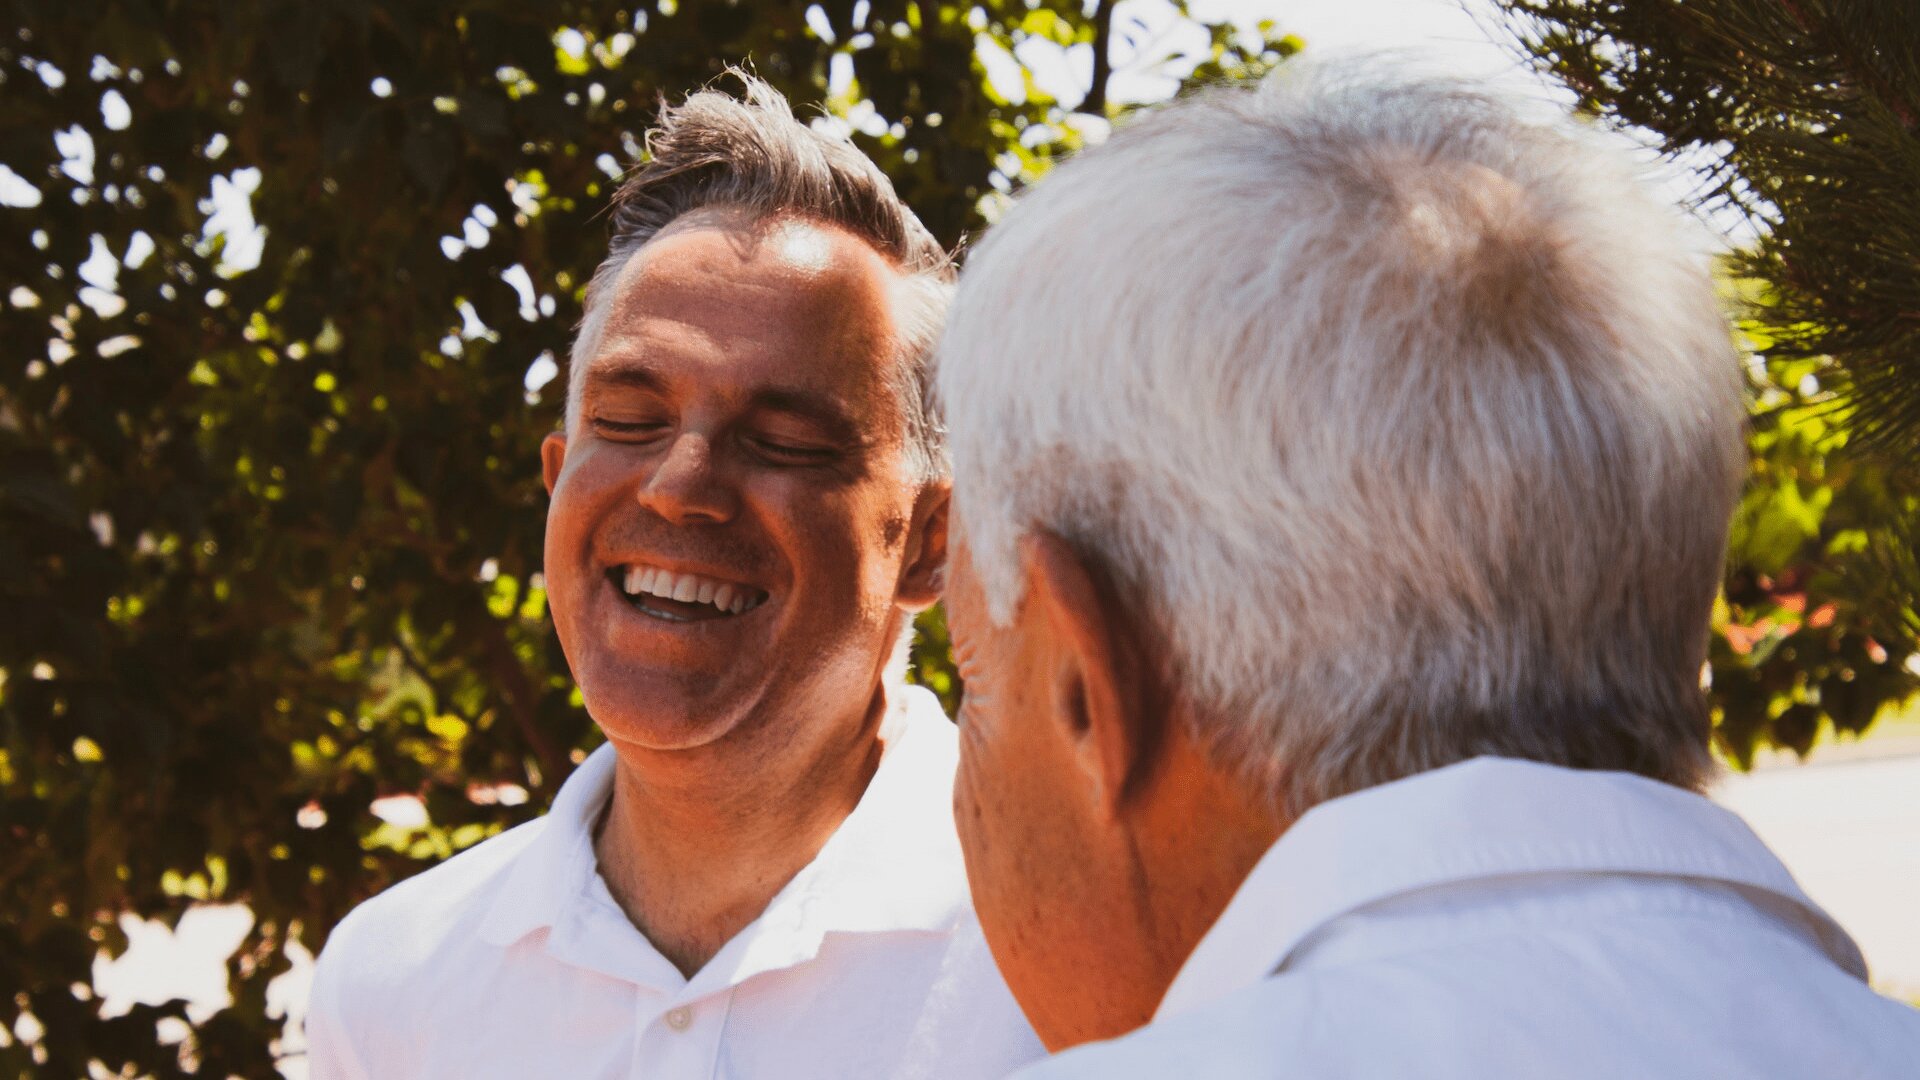 Two elderly people sitting under trees and smiling